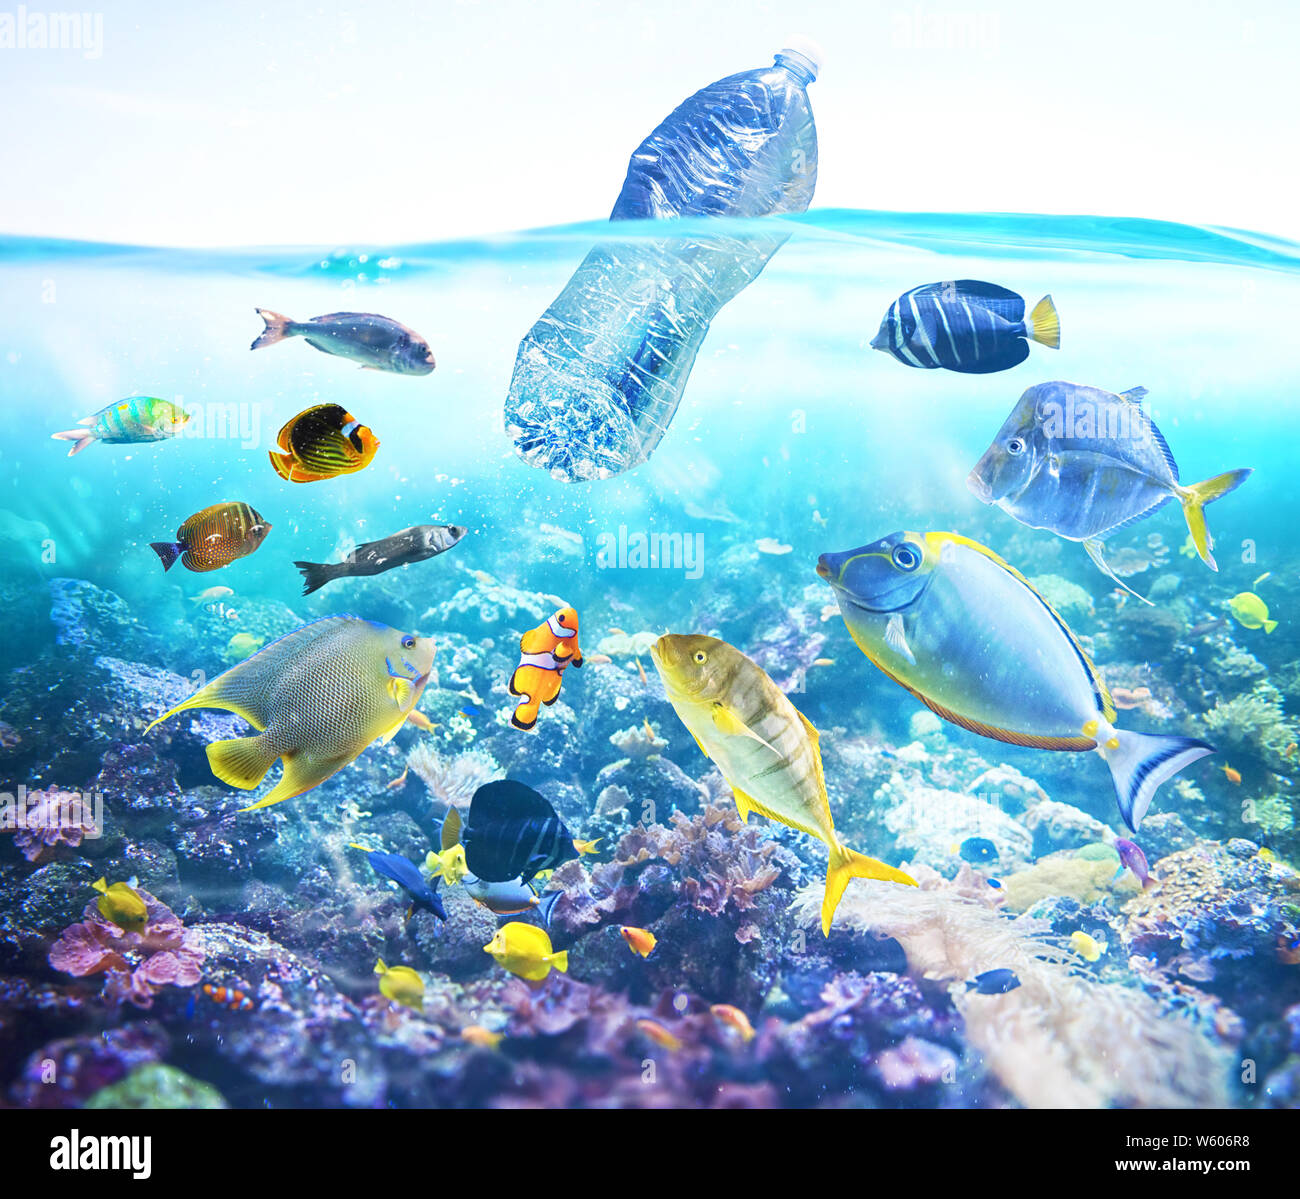 Fishes watch a floating bottle. Problem of plastic pollution under the sea concept. Stock Photo